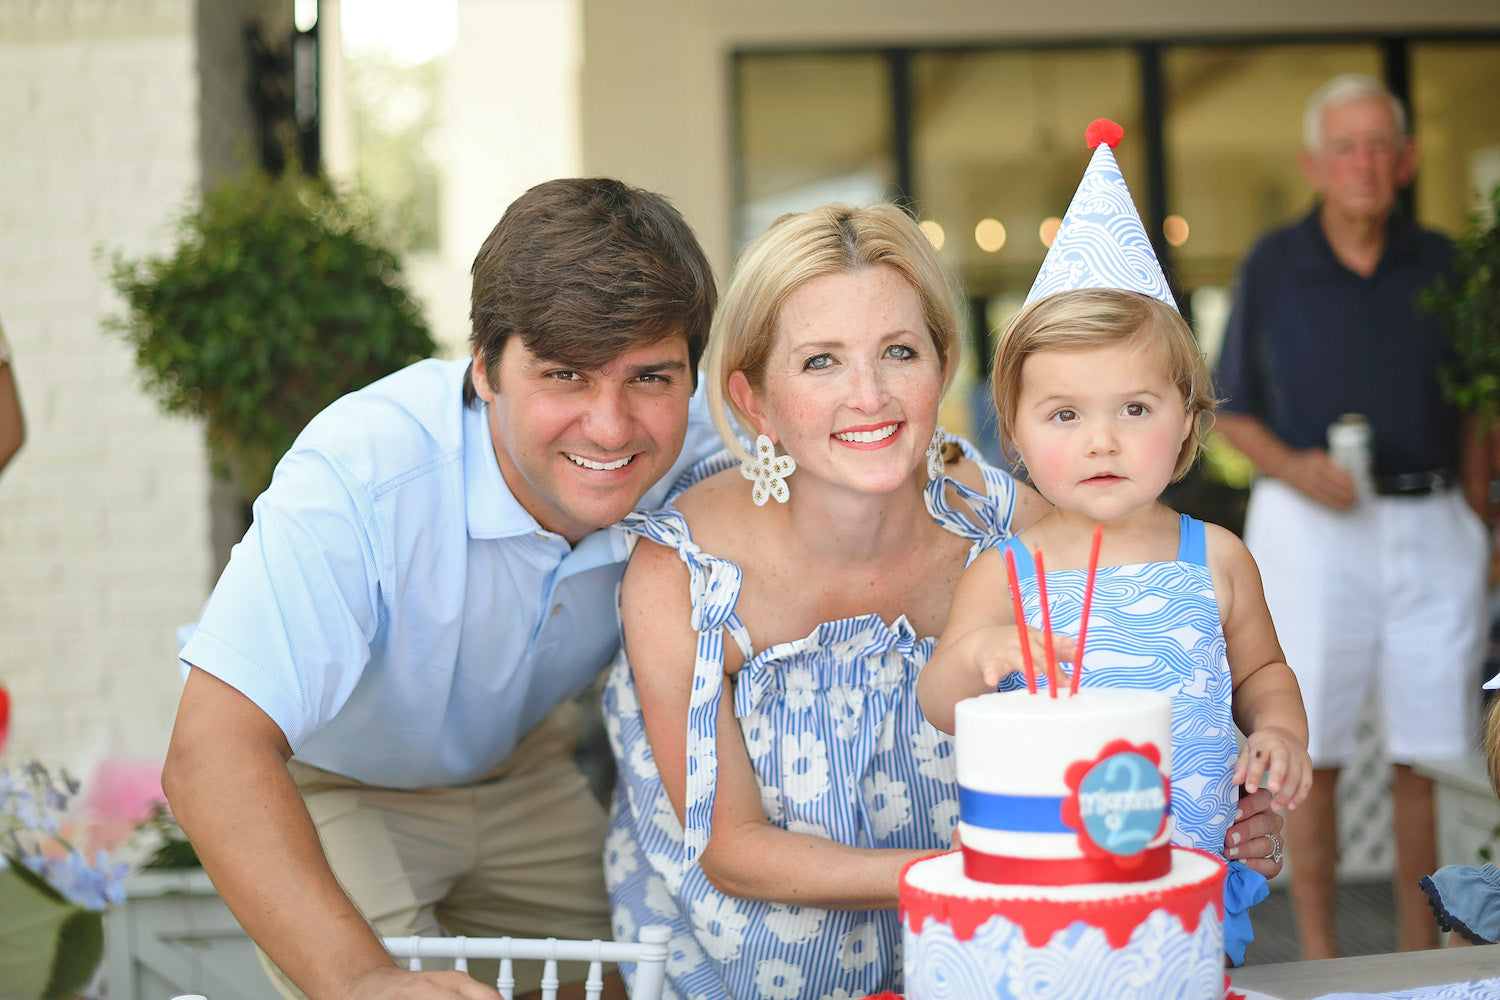 Celebrating with Caroline, mother of two from Louisiana